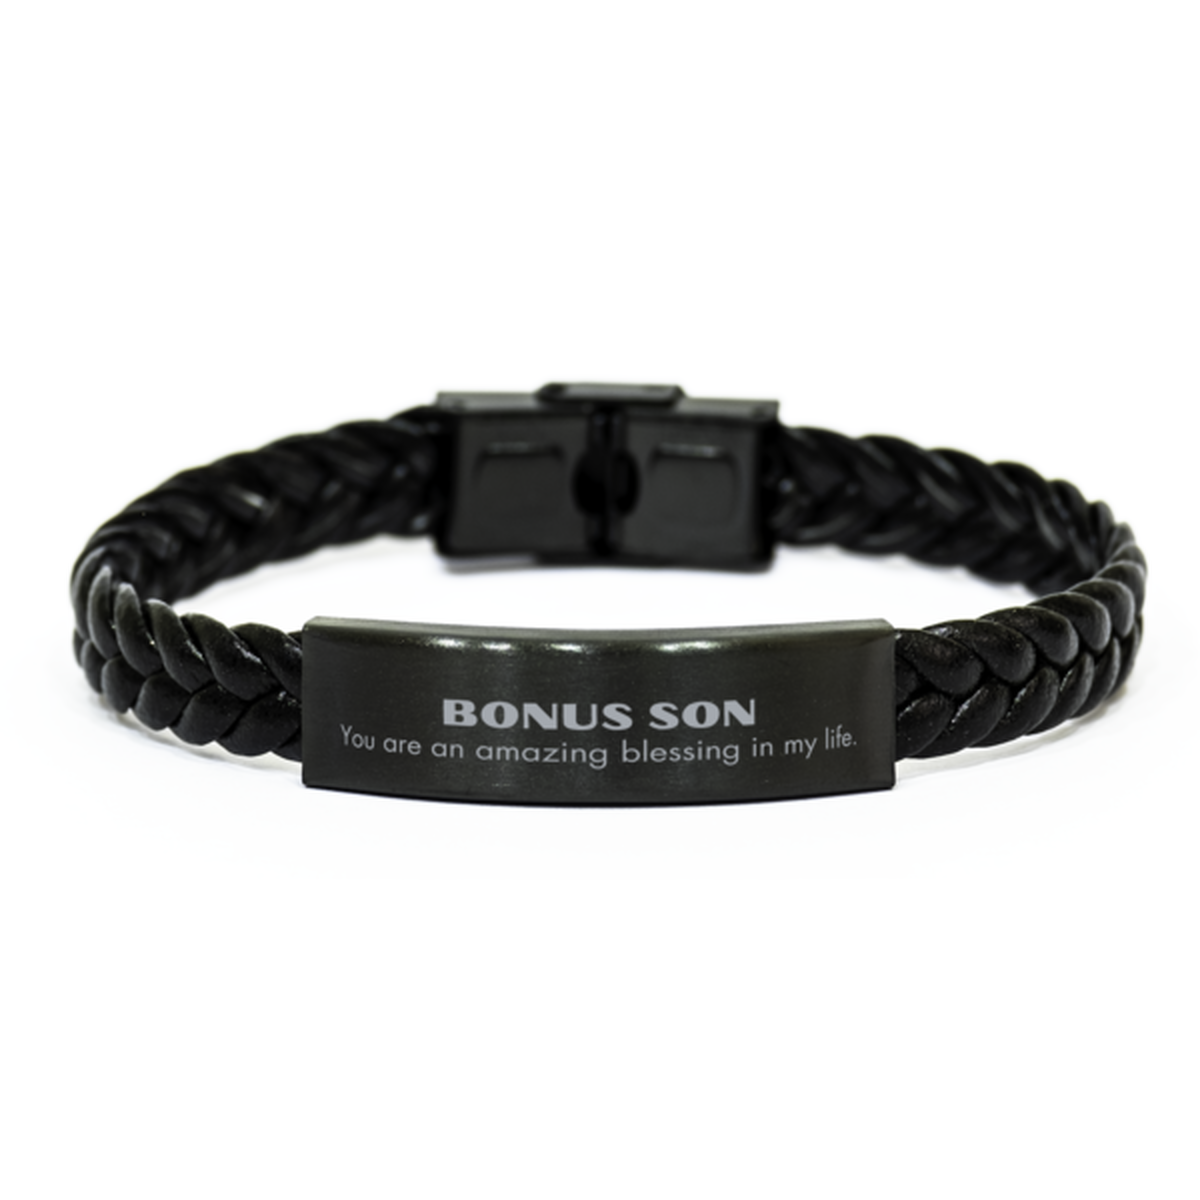 Bonus Son Braided Leather Bracelet, You are an amazing blessing in my life, Thank You Gifts For Bonus Son, Inspirational Birthday Christmas Unique Gifts For Bonus Son